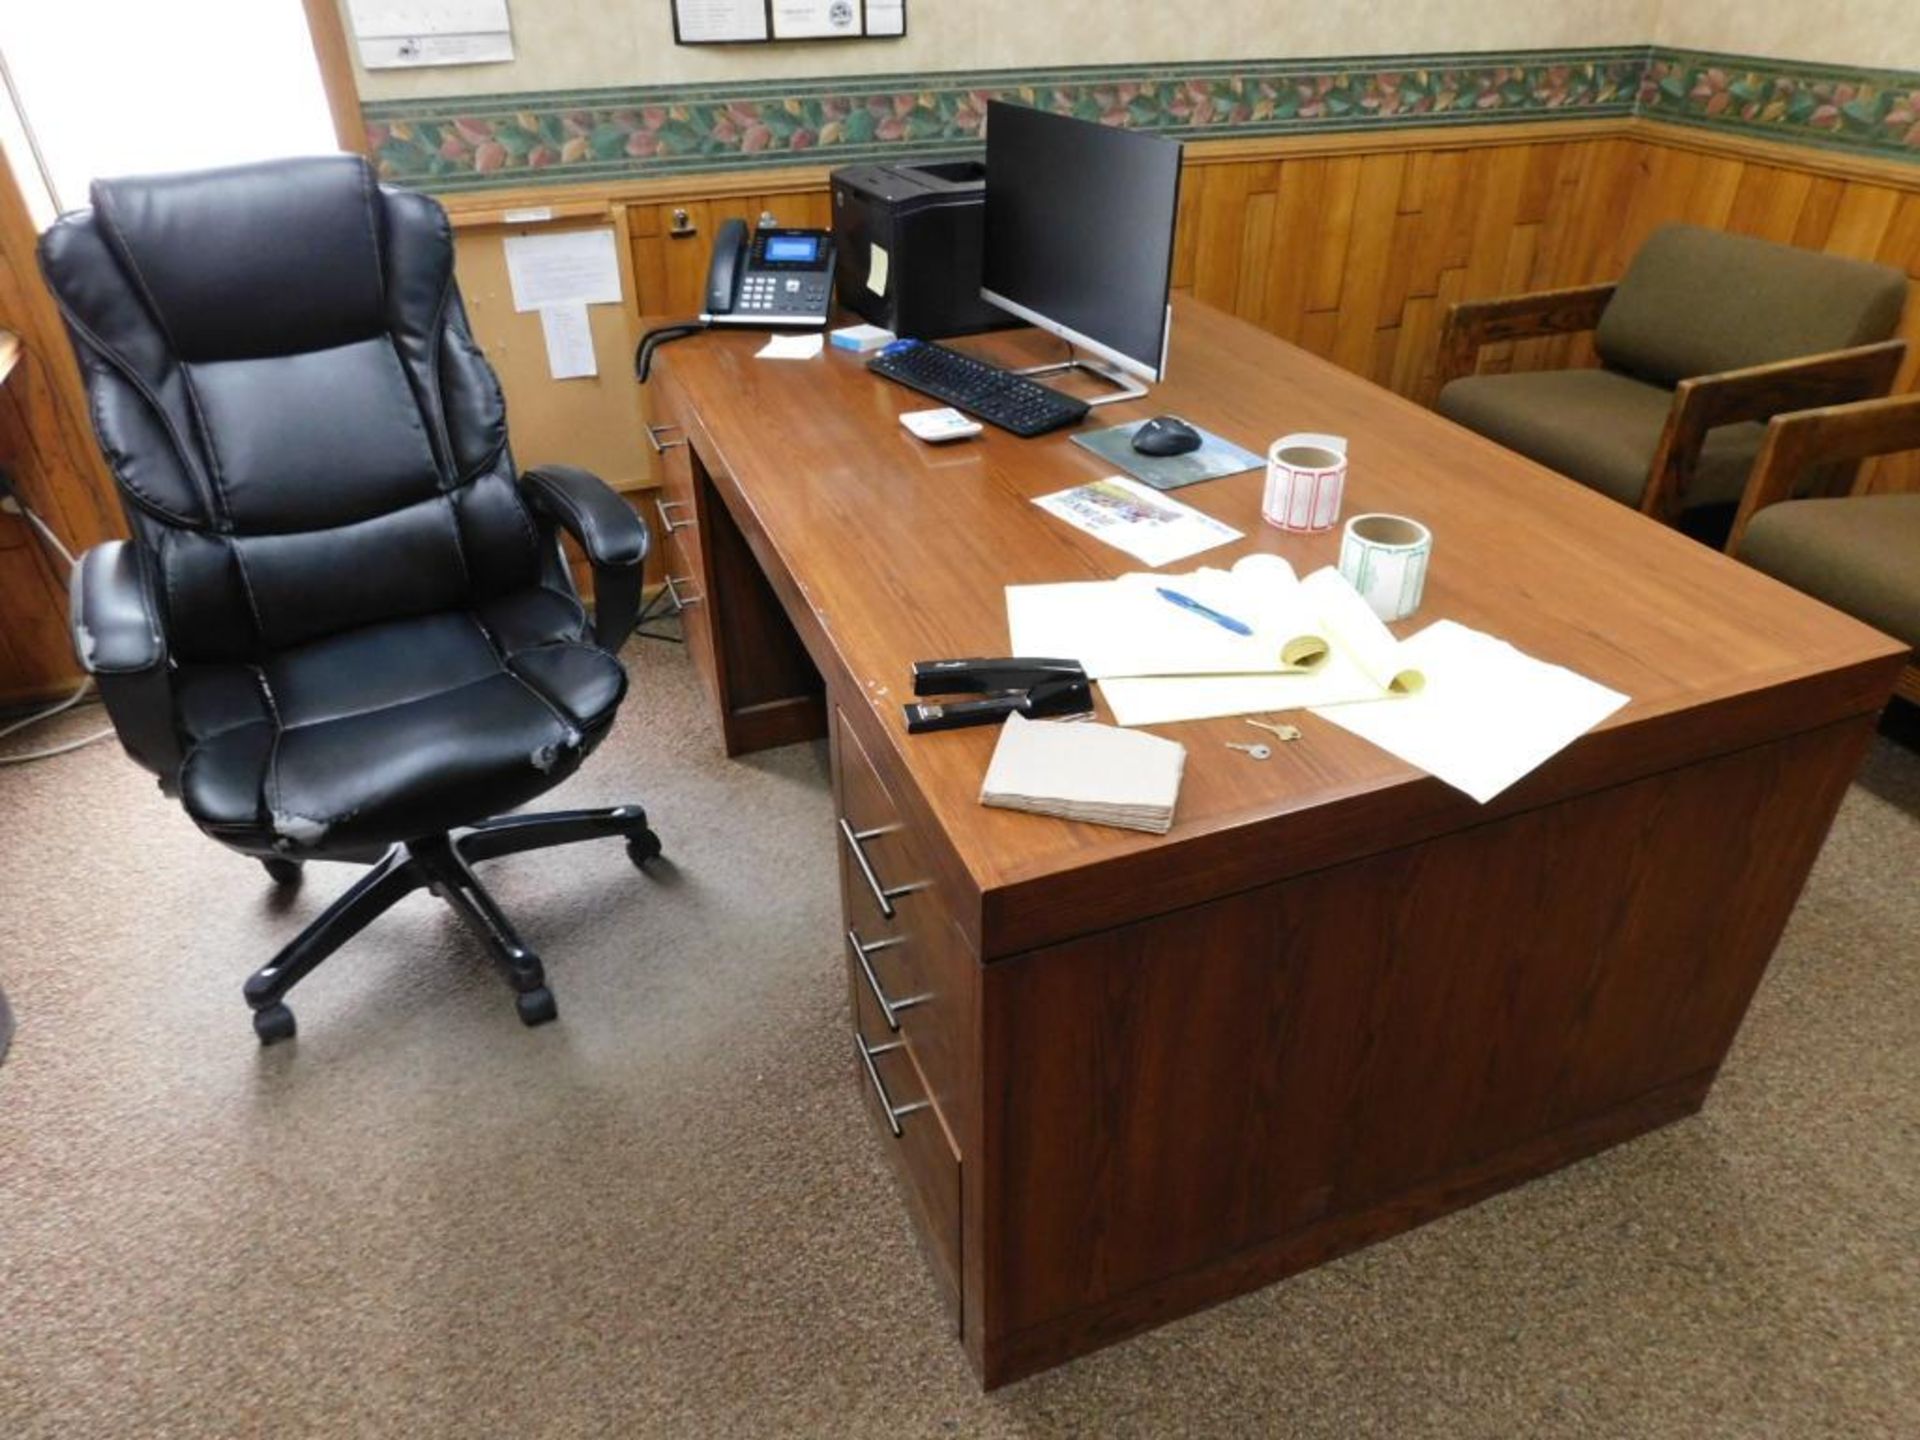 LOT: Contents of Main Office (NO ART, NO ELECTRONICS, NOTHING ATTACHED TO WALLS) - Image 9 of 27